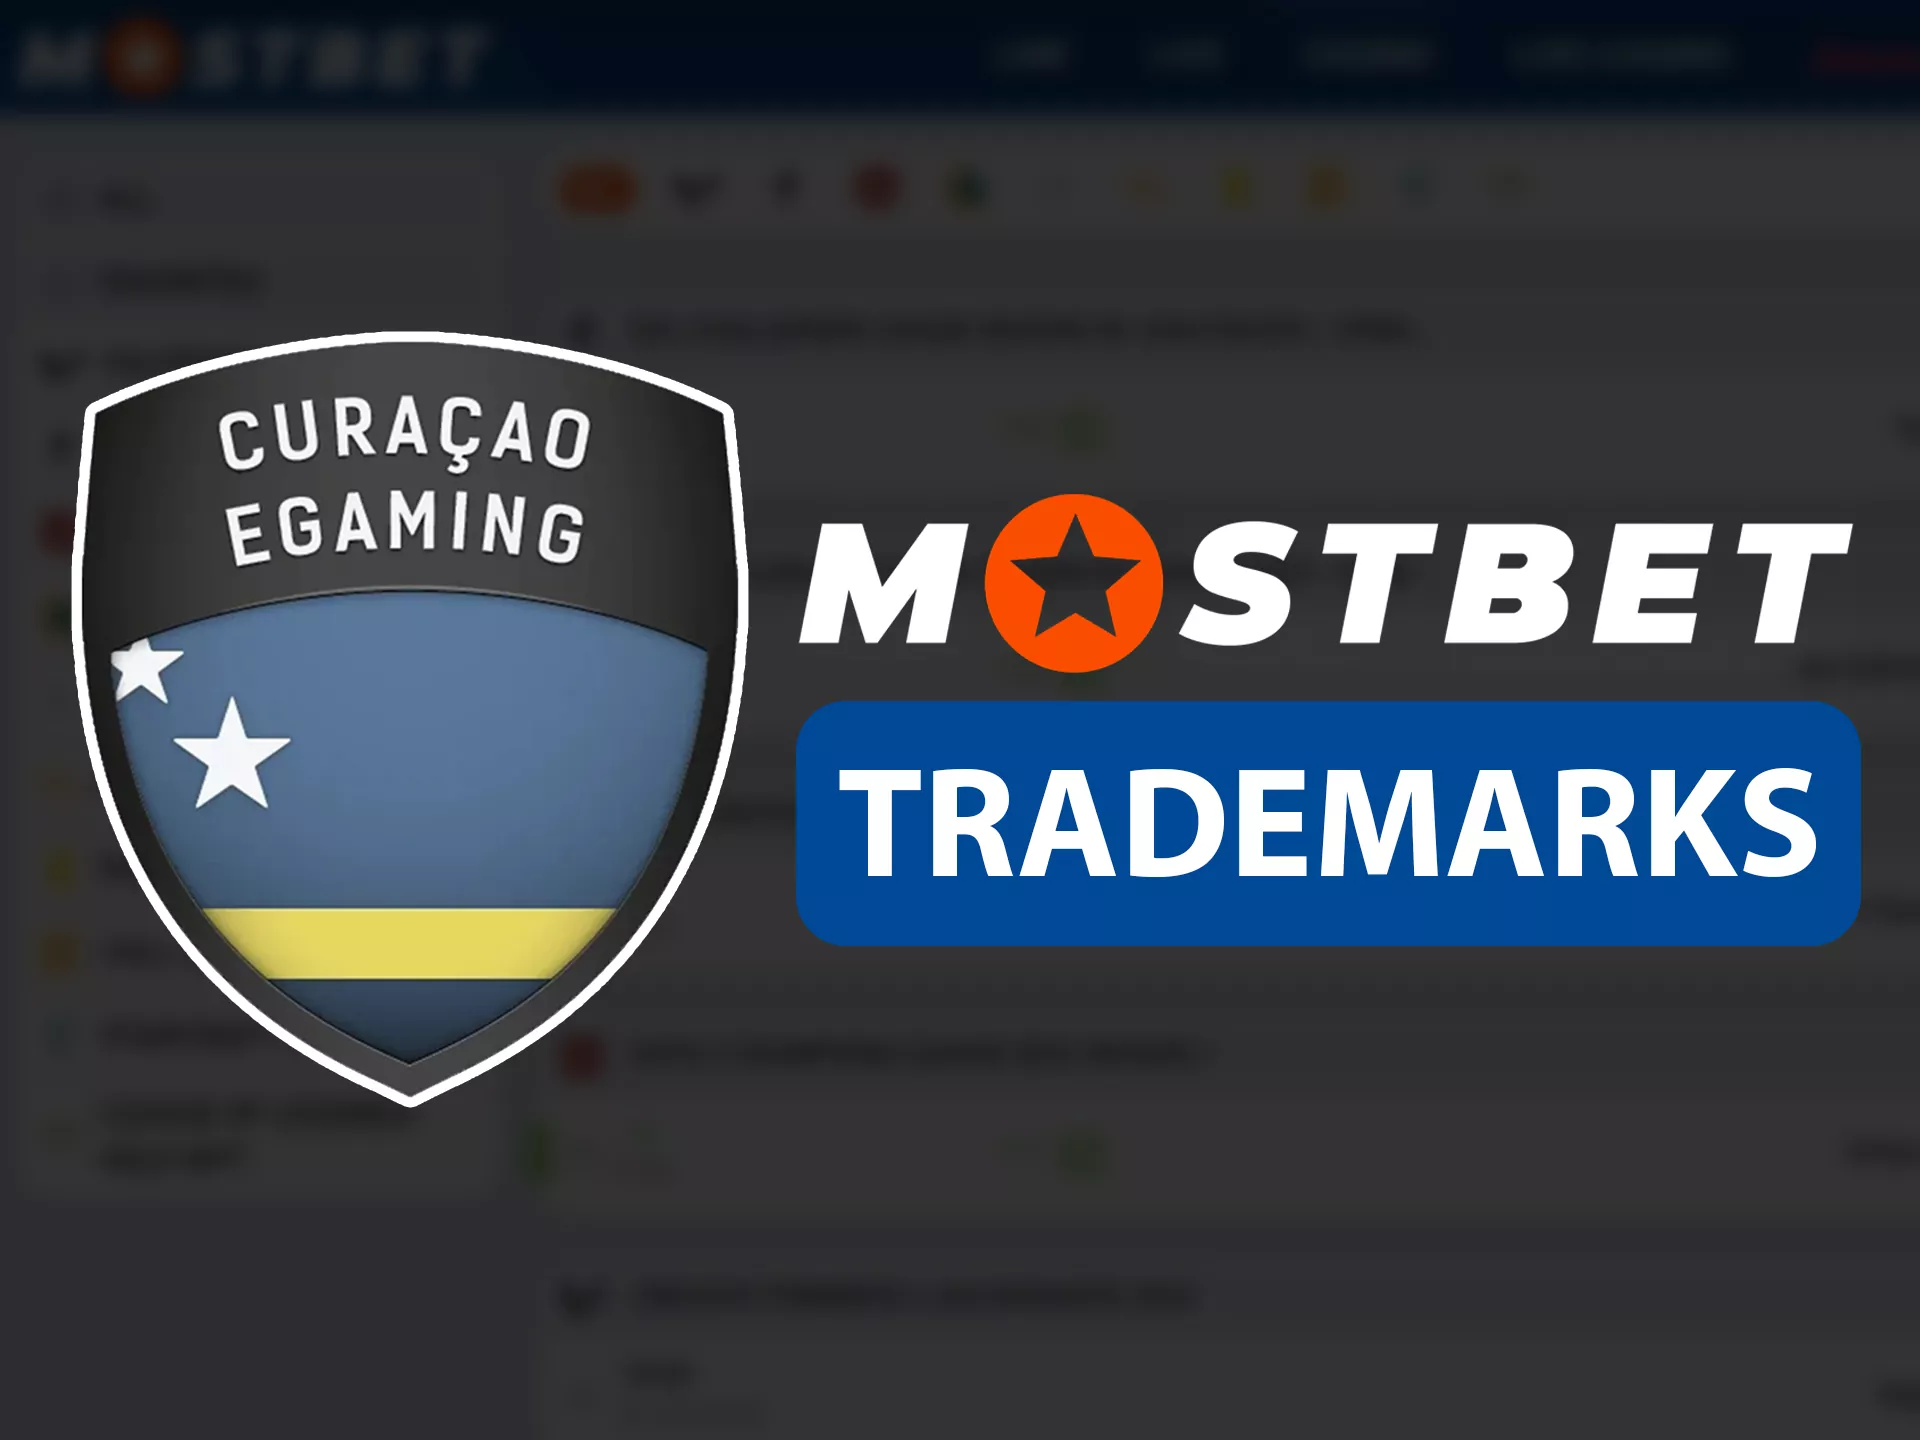 Mostbet has a various trademarks.